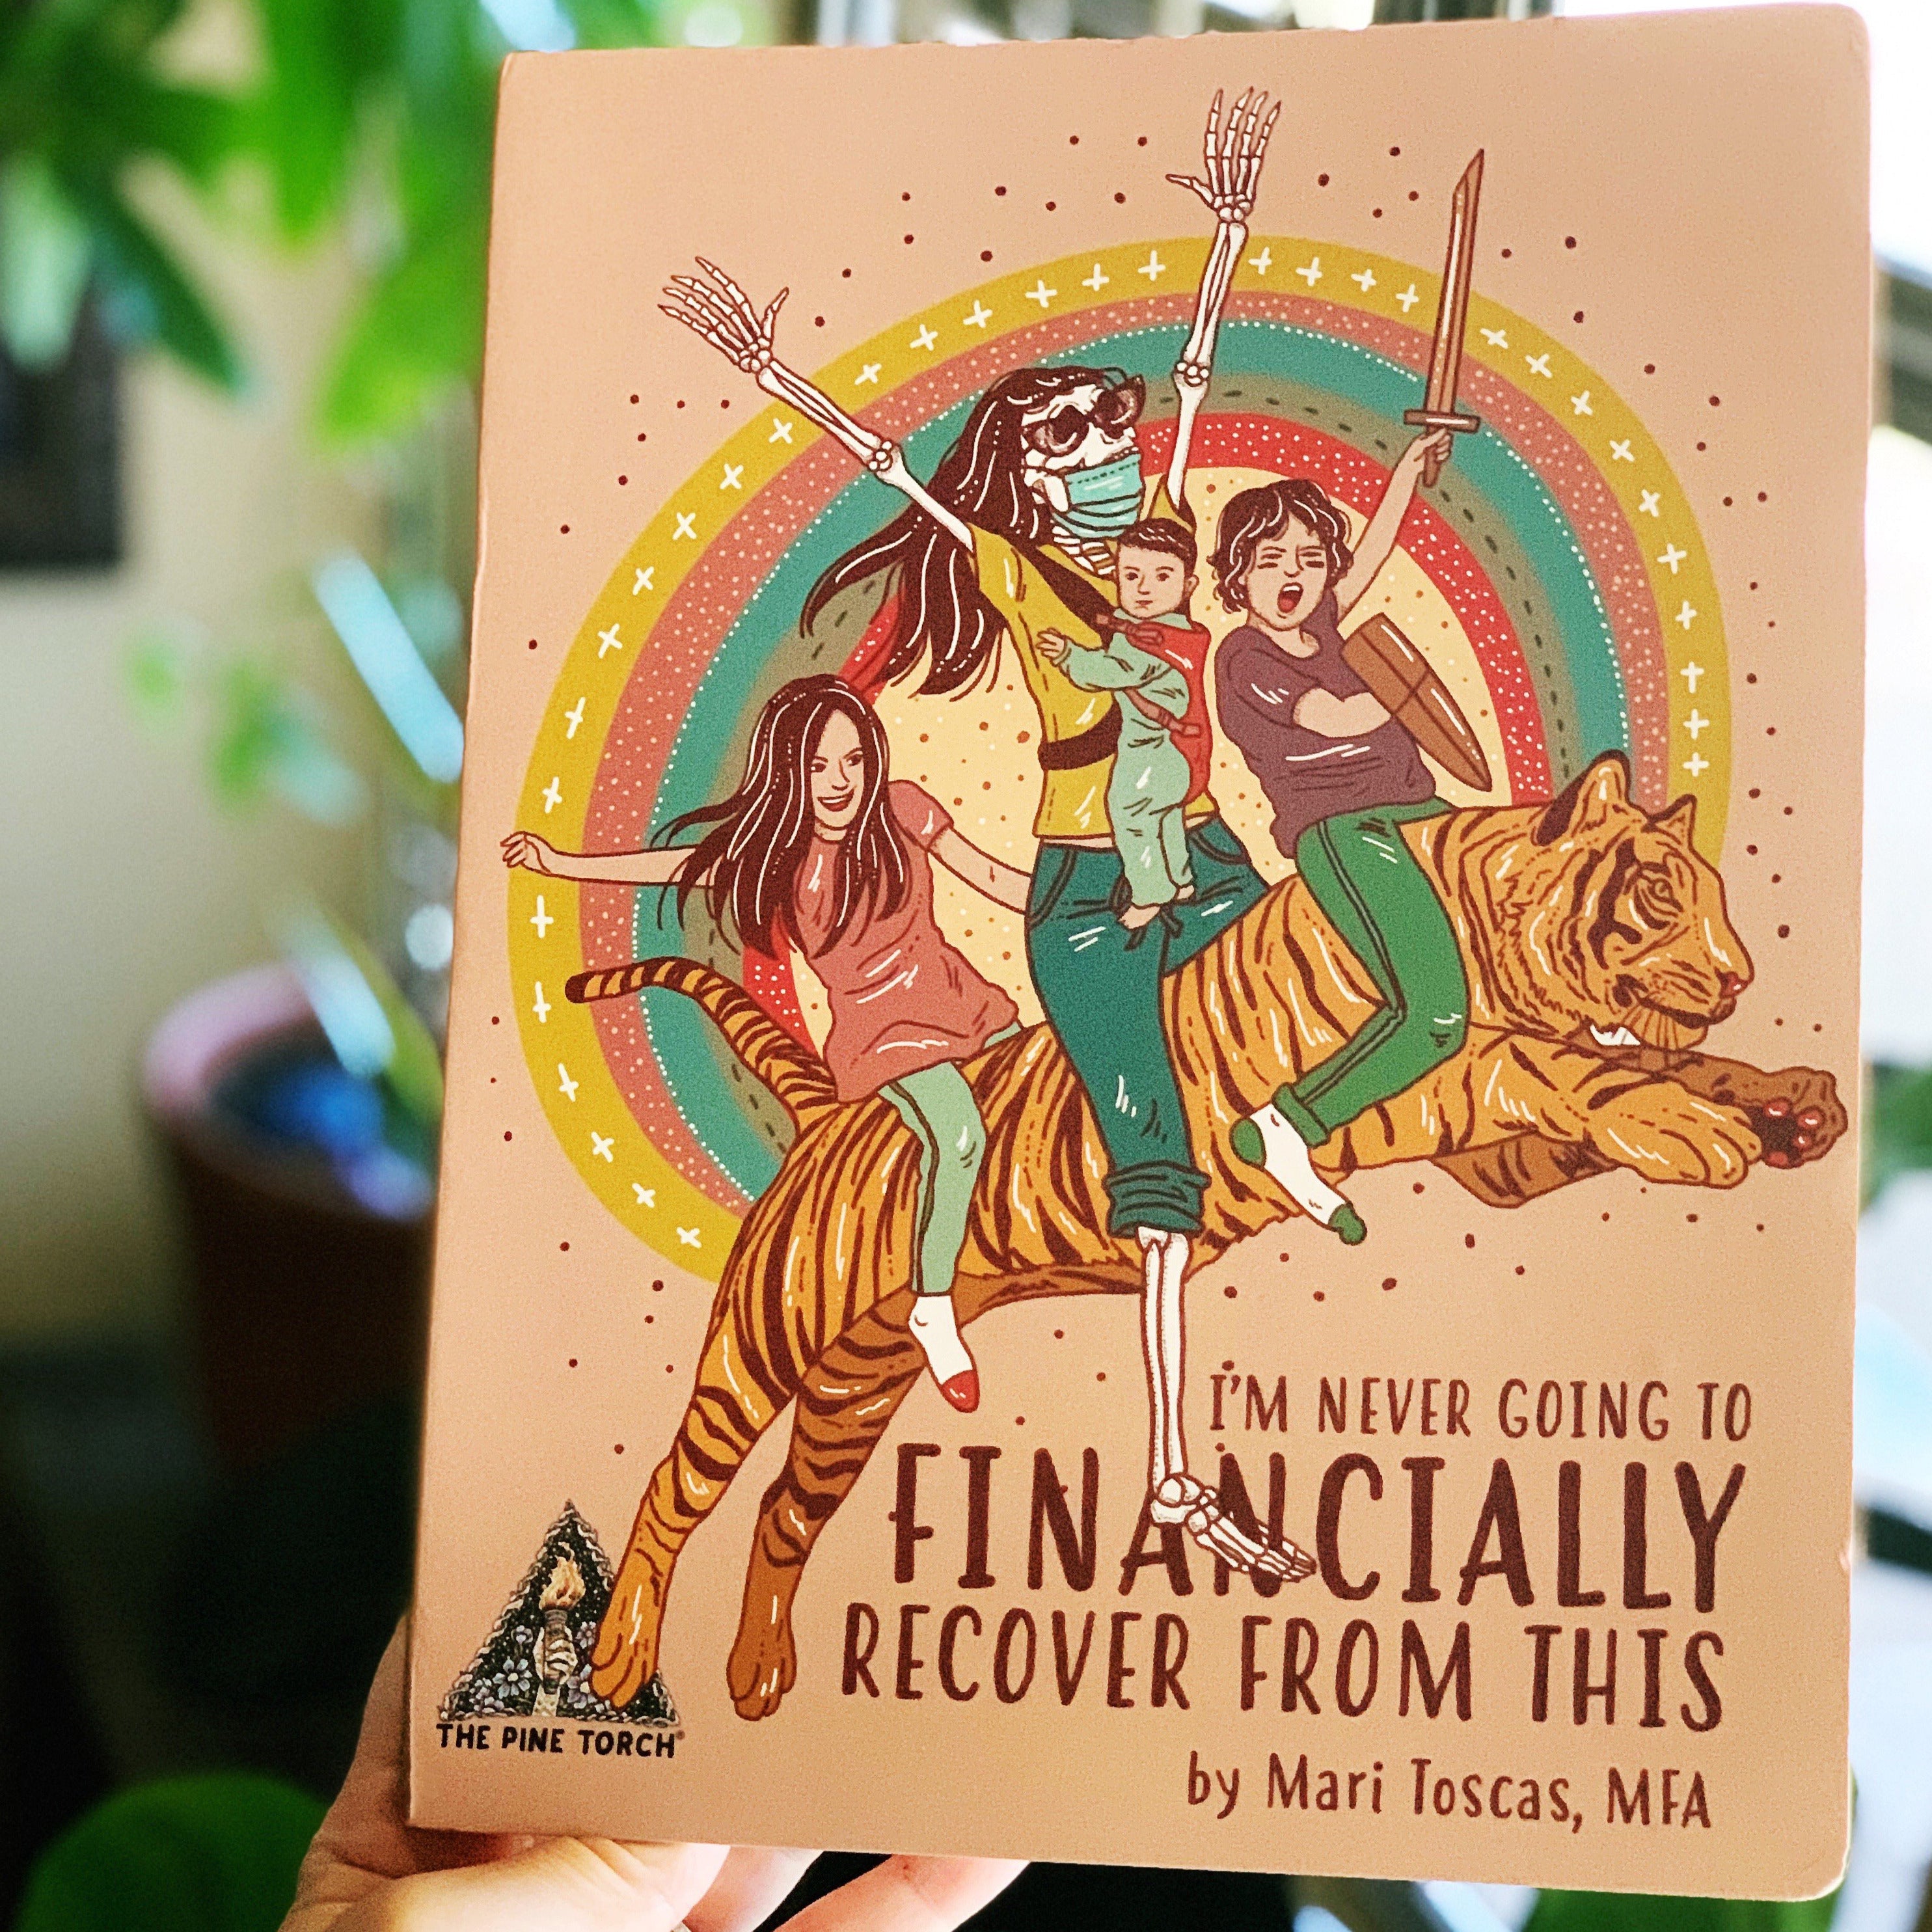 « I'M NEVER GOING TO FINANCIALLY RECOVER » BOARD BOOK